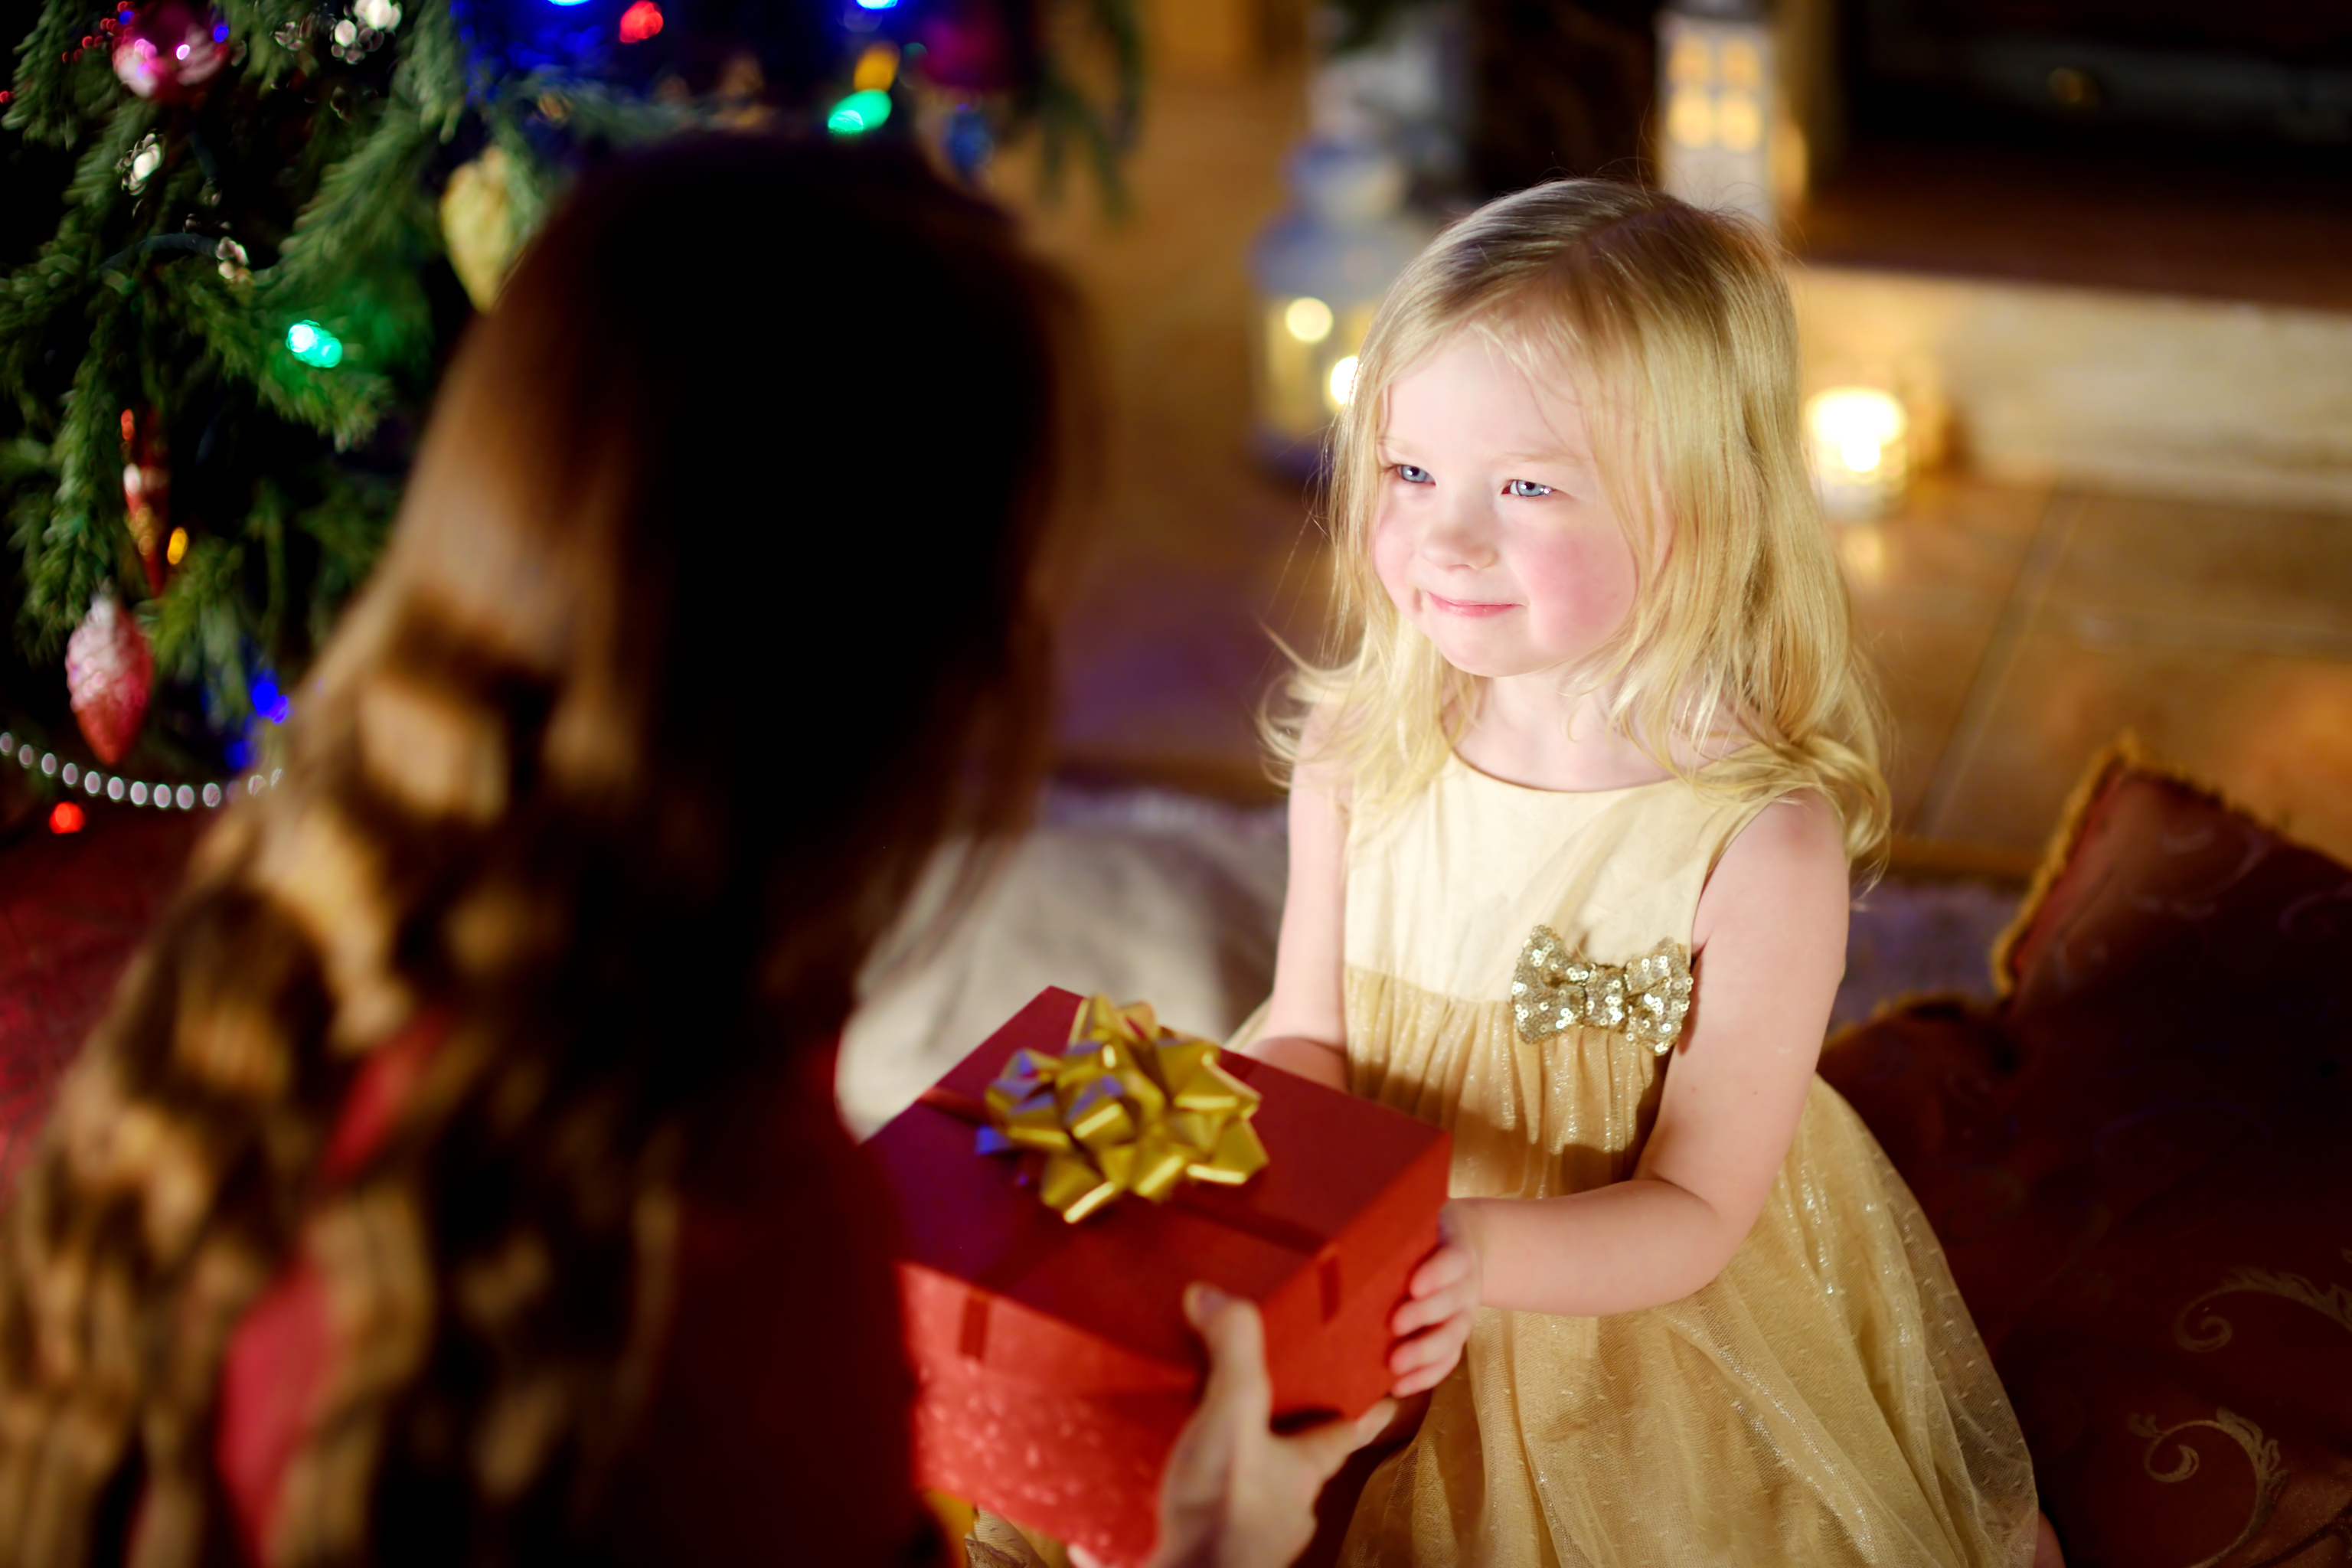 A happy little girl getting a Christmas gift from her mother | Source: Getty Images